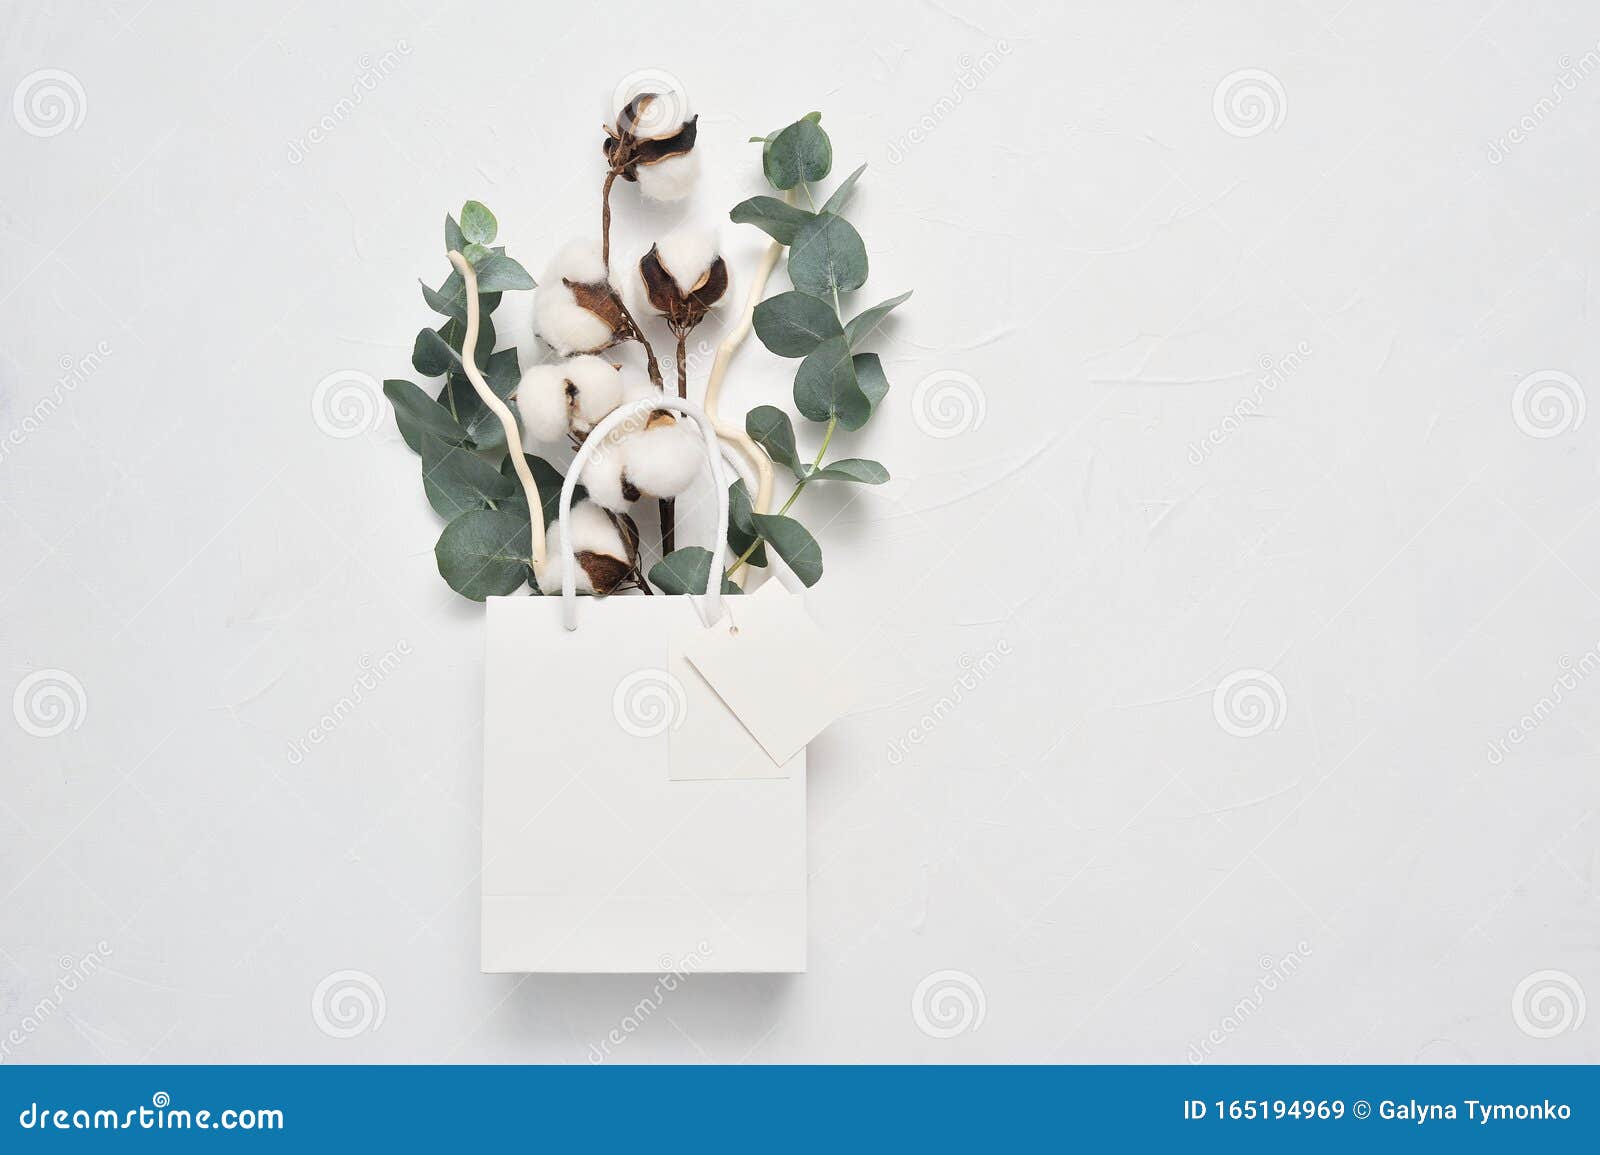 Download Mock Up Autumn Of Dried Bouquet Of Cotton Flowers And Leaves Of Eucaliptus In White Package With Place For Your Text Stock Image Image Of Cotton Leaves 165194969